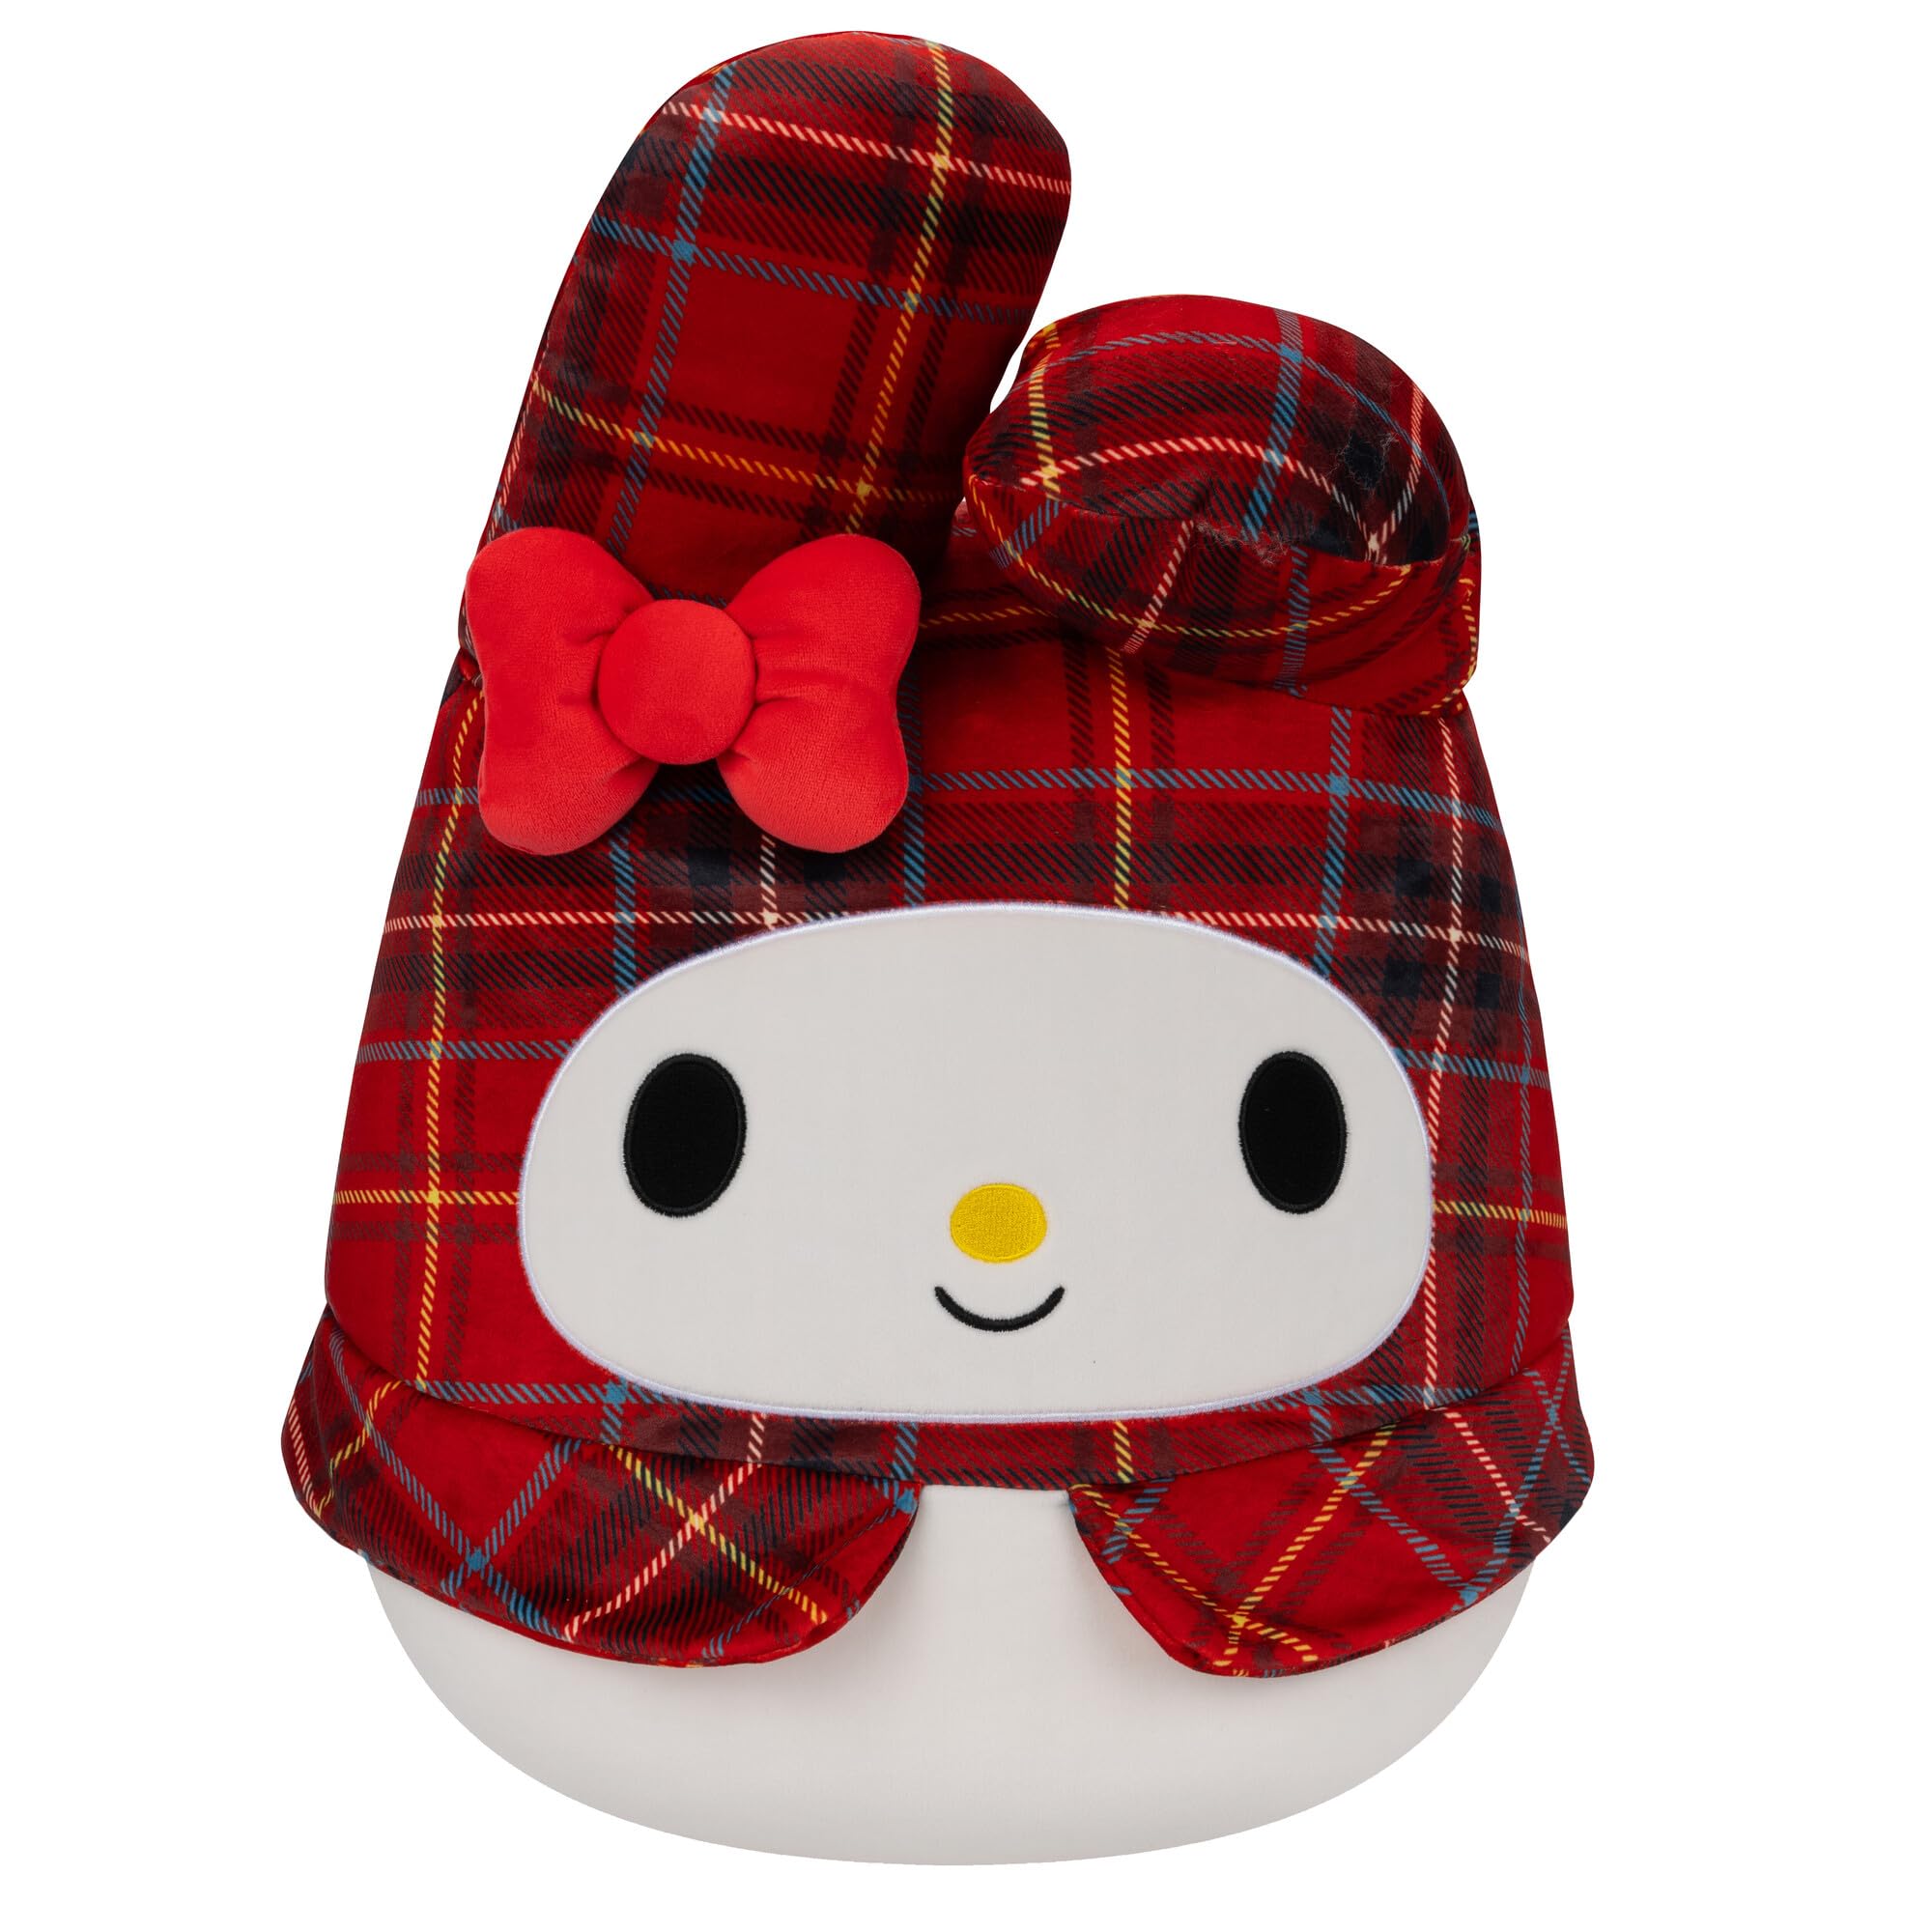 14" Squishmallows Sanrio Red Plaid My Melody Plush Toy $13.20 + Free Shipping w/ Prime or on $35+